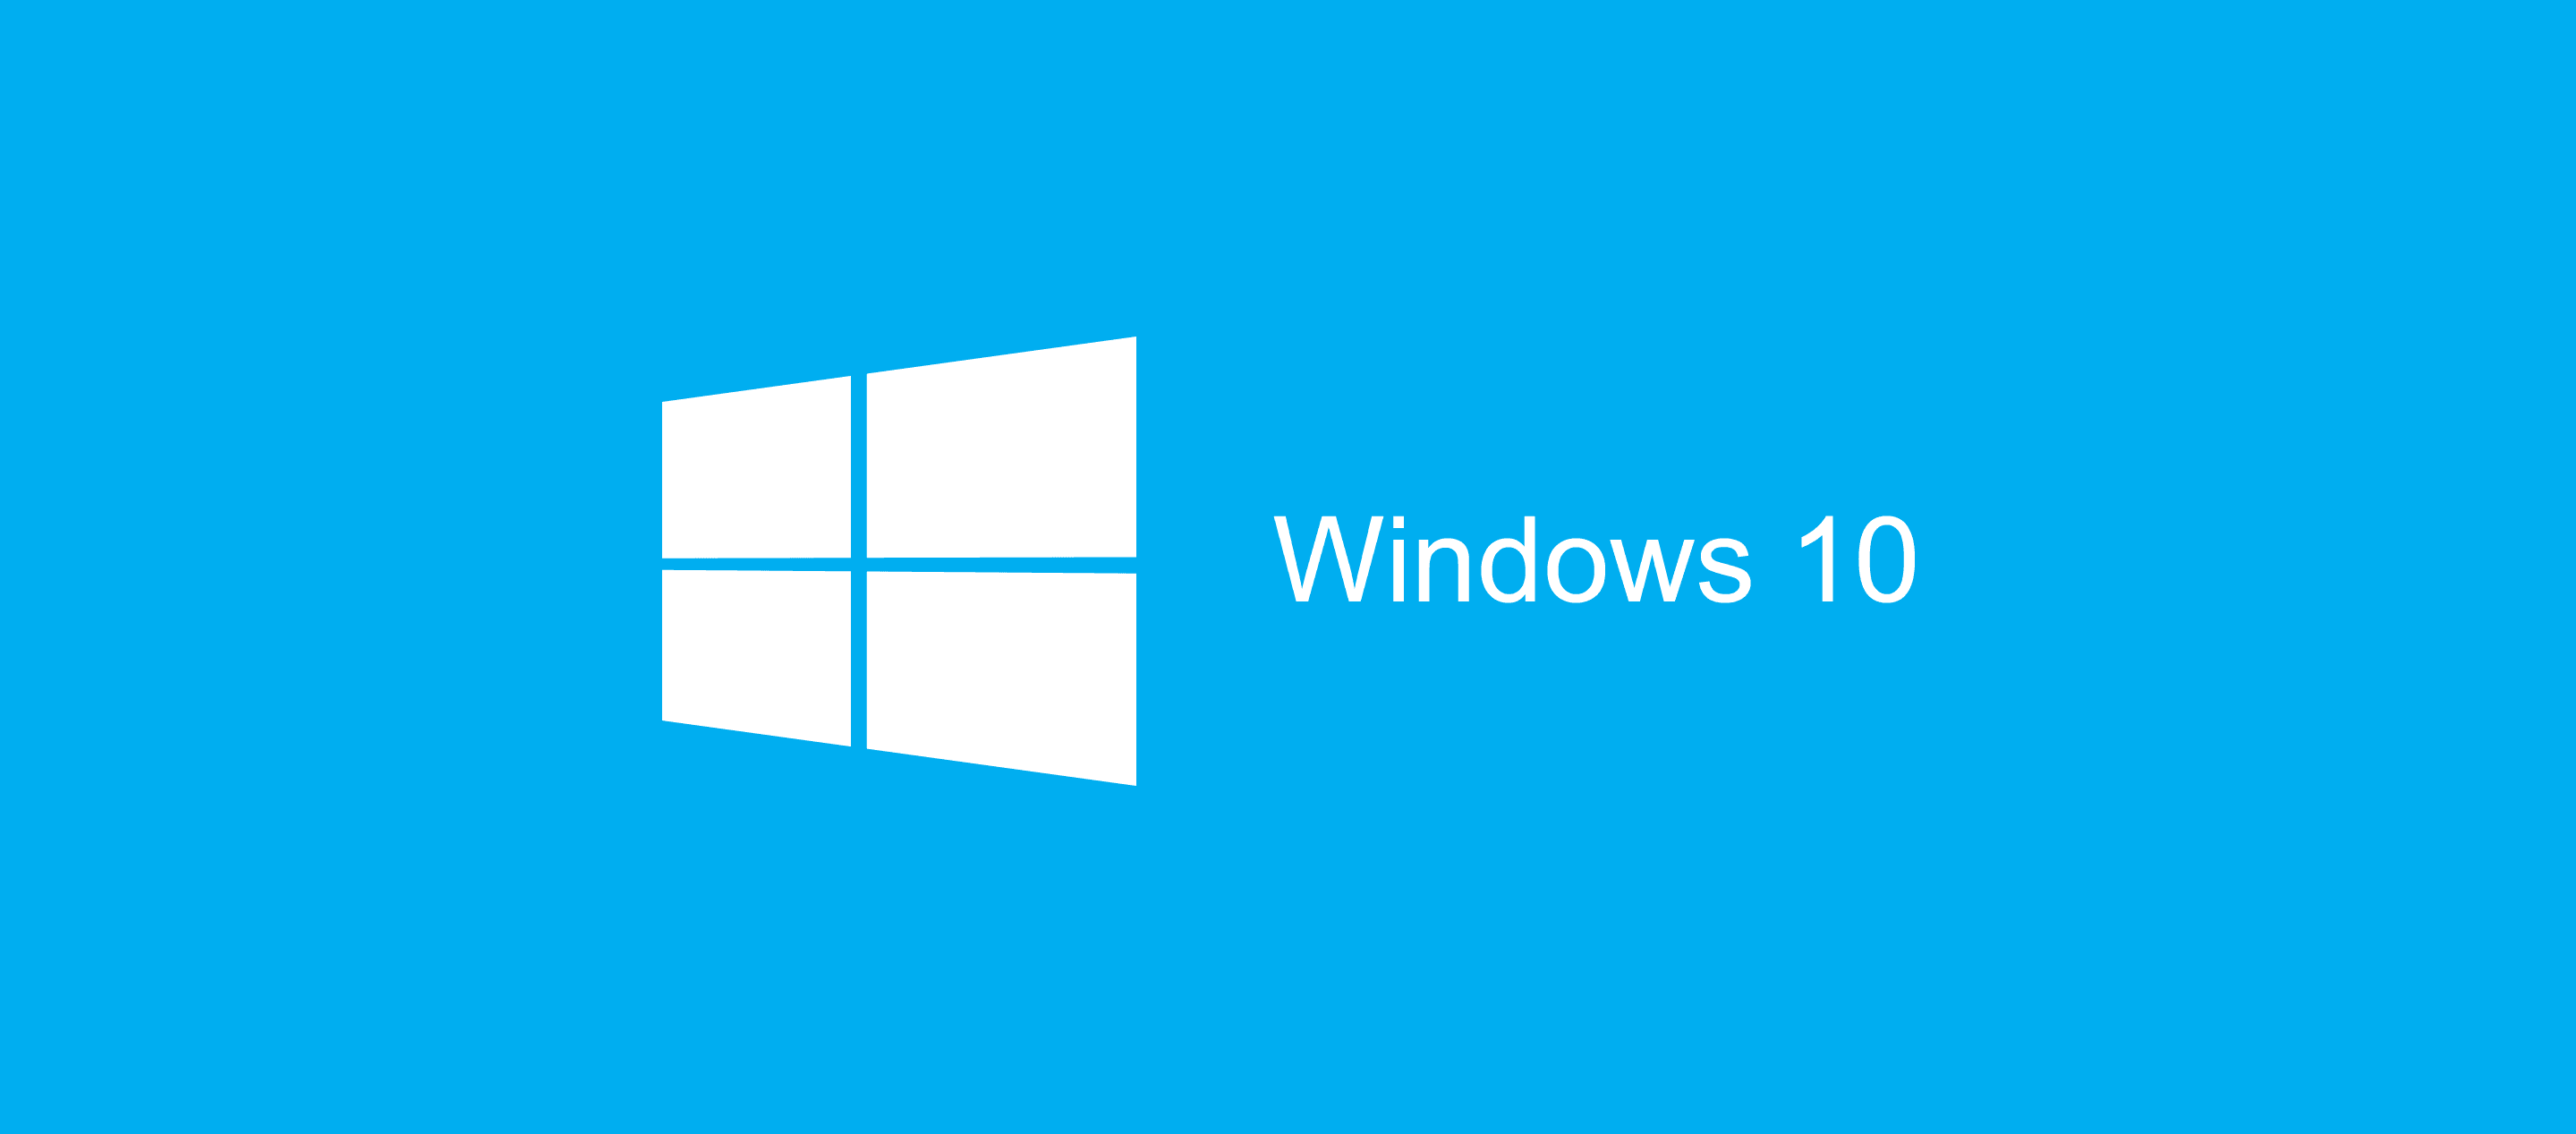 microsoft-to-allow-pirated-copies-of-windows-to-upgrade-to-windows-10-142669950701